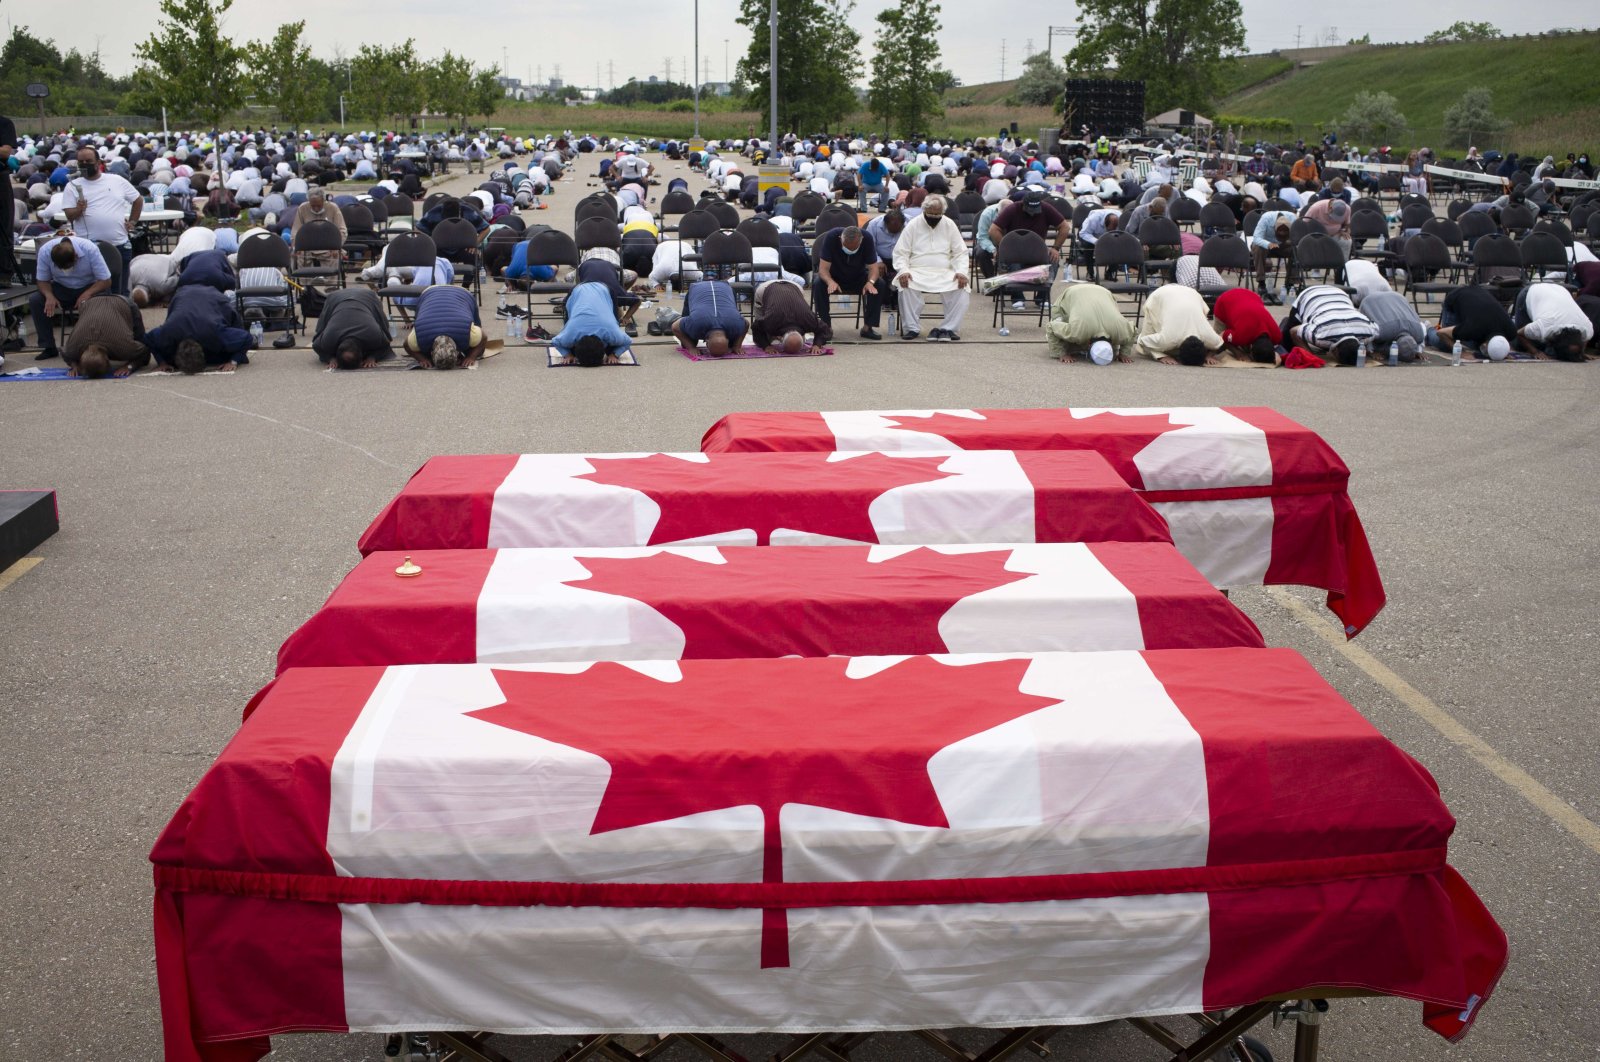 Mourners and supporters gather for a public funeral for members of the Afzaal family at the Islamic Centre of Southwest Ontario in London, Canada, June 12, 2021. (AFP Photo)